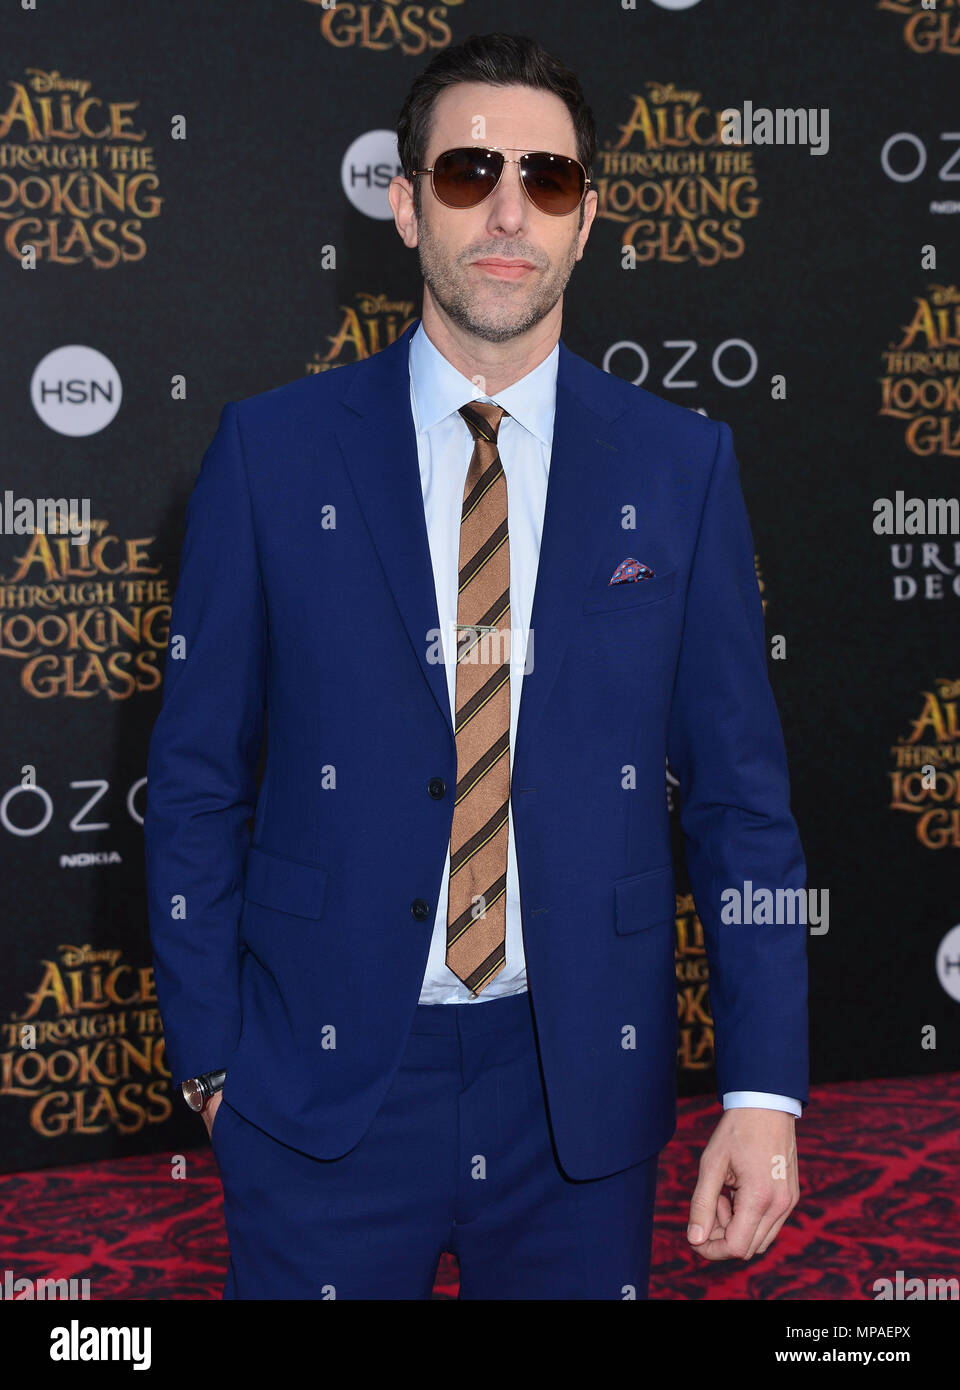 Sacha Raron Cohen 230  at the Alice Through the Looking Glass Premiere at the El Capitan Theatre in Los Angeles. May 23, 2016.Sacha Raron Cohen 230 ------------- Red Carpet Event, Vertical, USA, Film Industry, Celebrities,  Photography, Bestof, Arts Culture and Entertainment, Topix Celebrities fashion /  Vertical, Best of, Event in Hollywood Life - California,  Red Carpet and backstage, USA, Film Industry, Celebrities,  movie celebrities, TV celebrities, Music celebrities, Photography, Bestof, Arts Culture and Entertainment,  Topix, Three Quarters, vertical, one person,, from the year , 2016,  Stock Photo